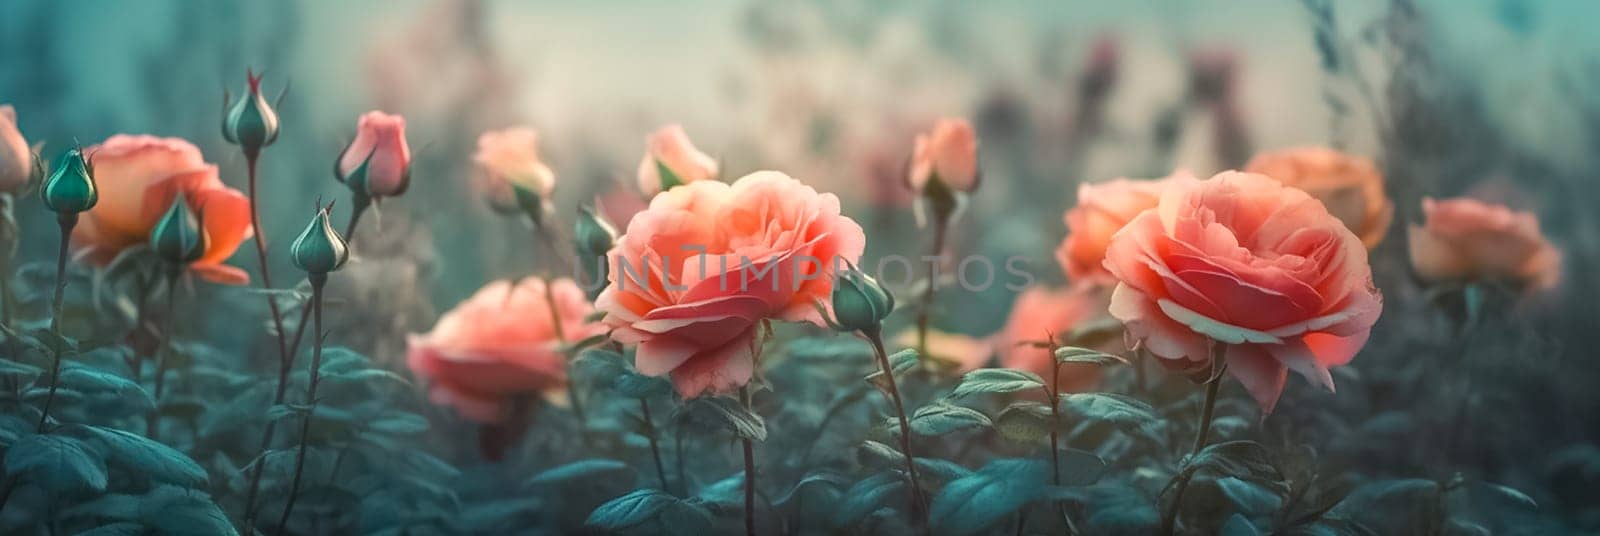 A field of delicate red coral roses. Long banner with rose flowers. Roses grow in the garden or in the field. by esvetleishaya